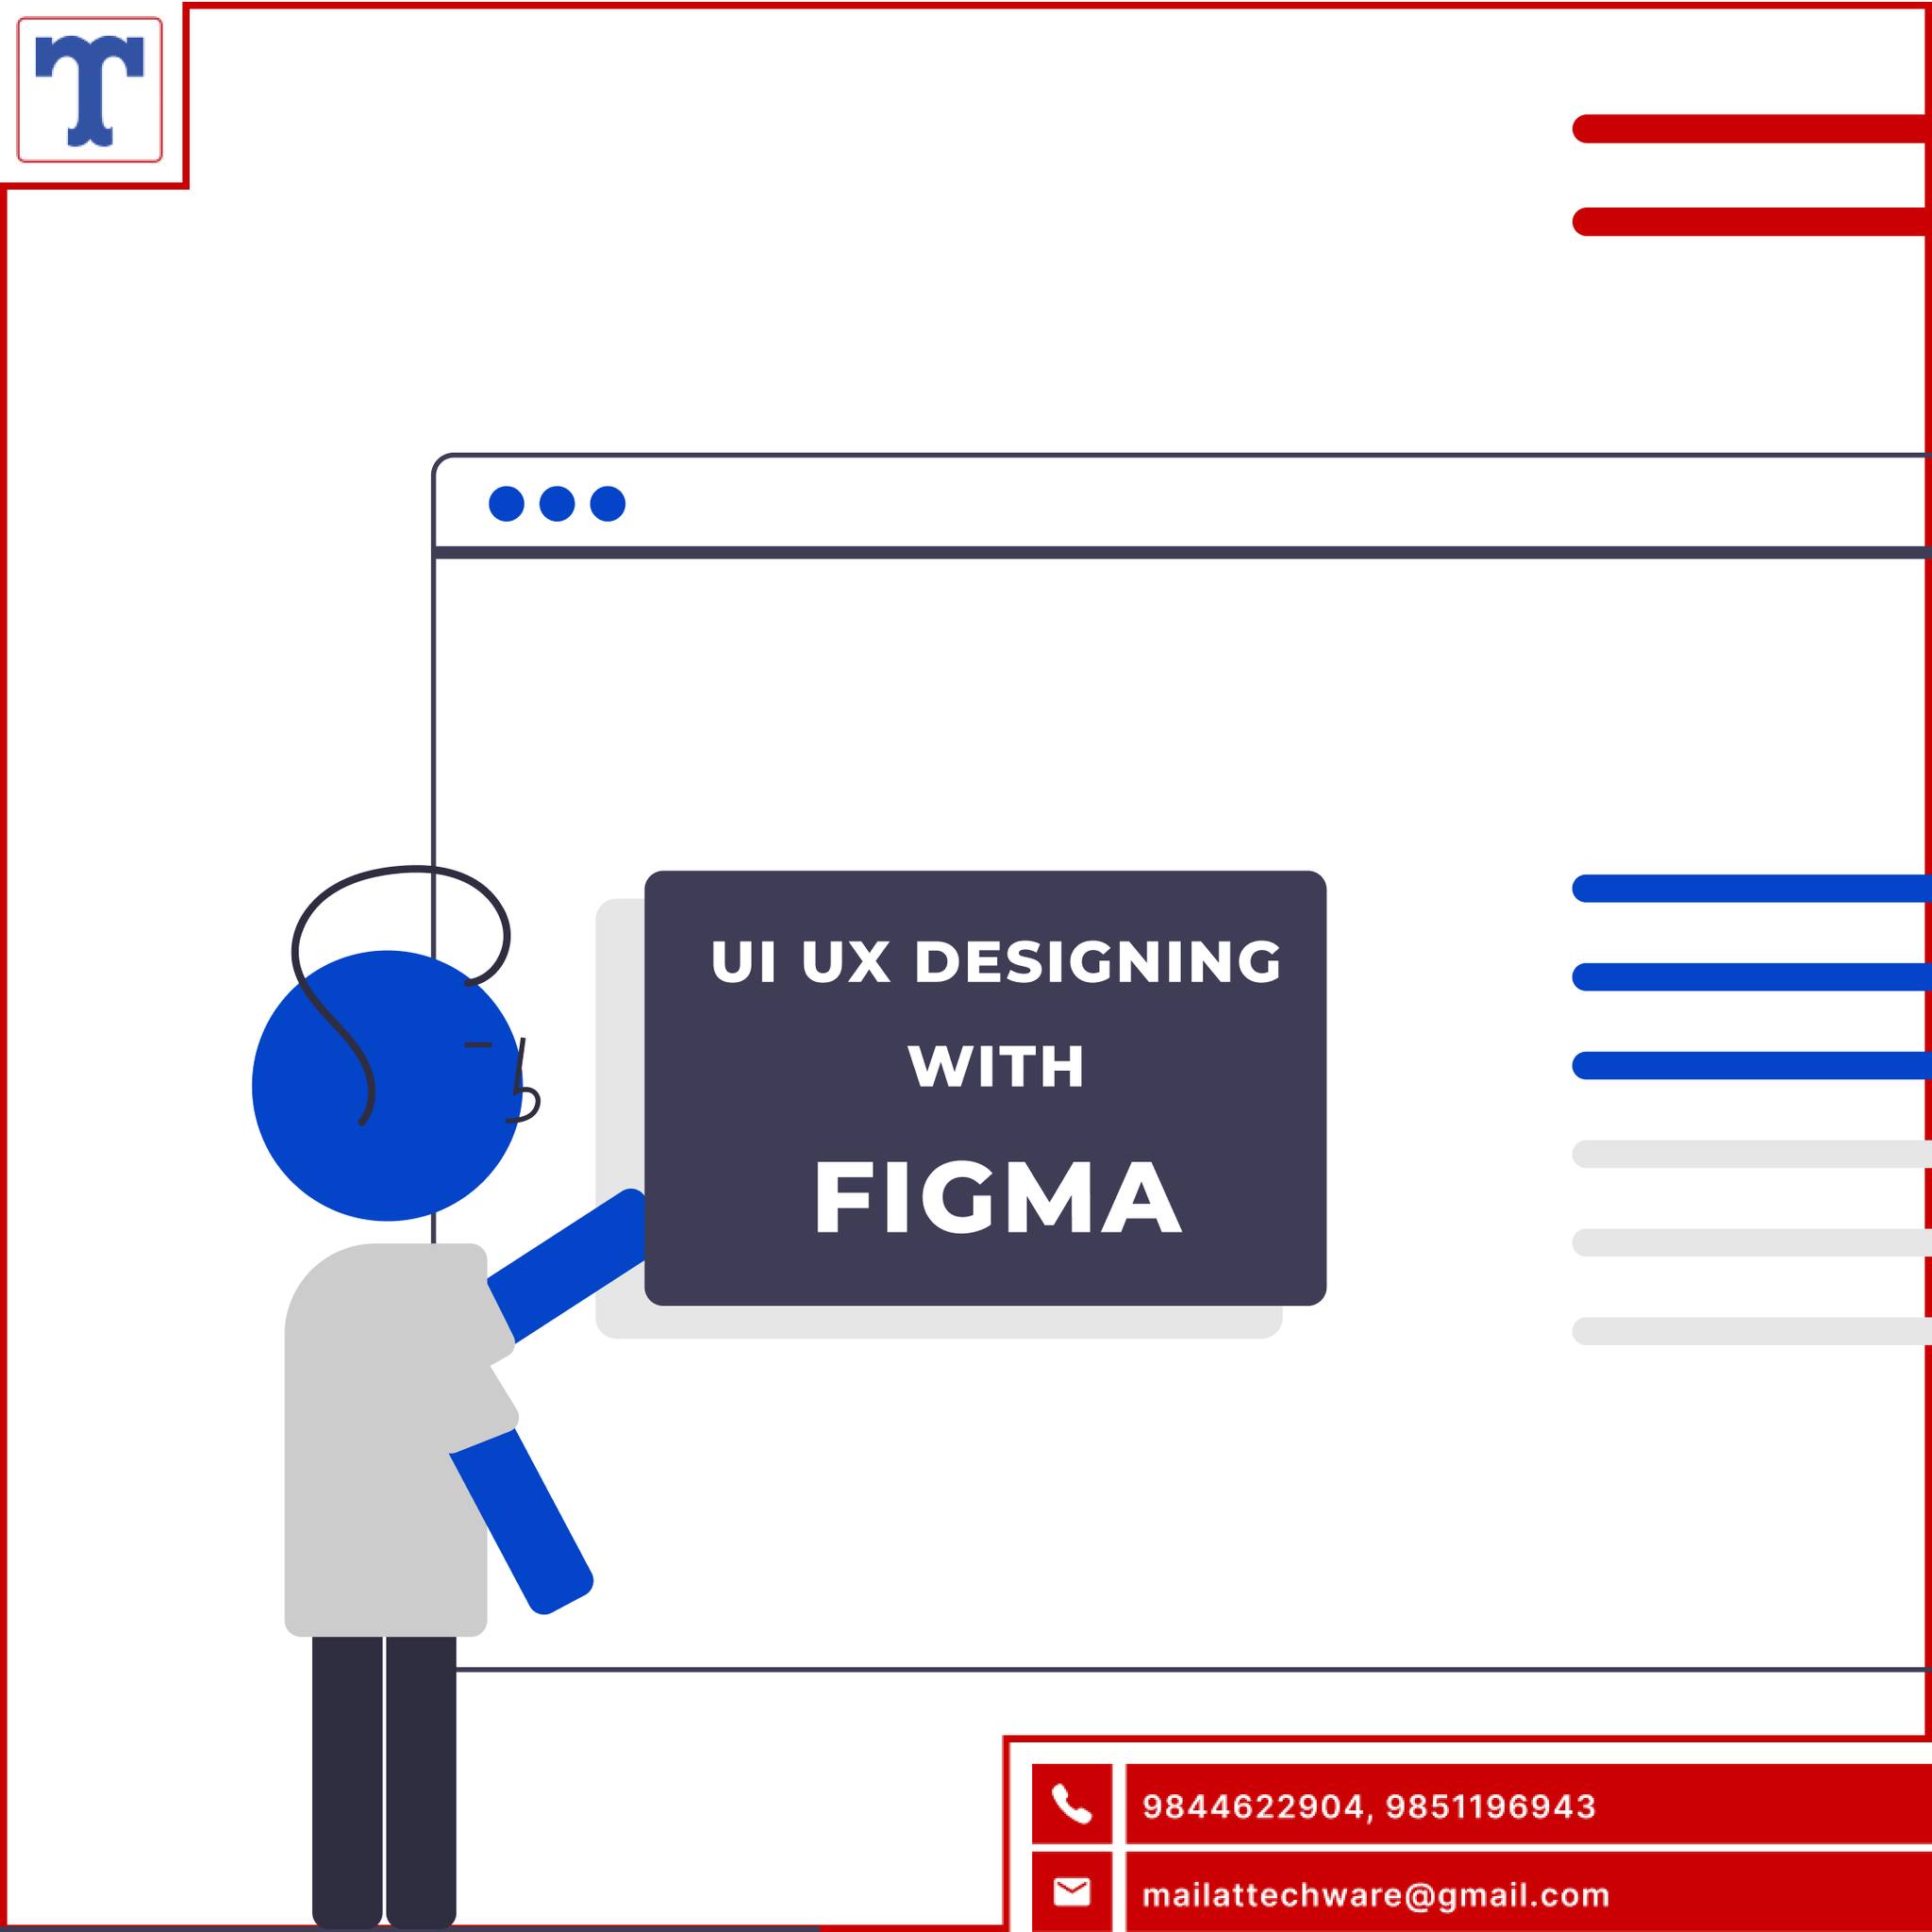 UI UX Designing with Figma